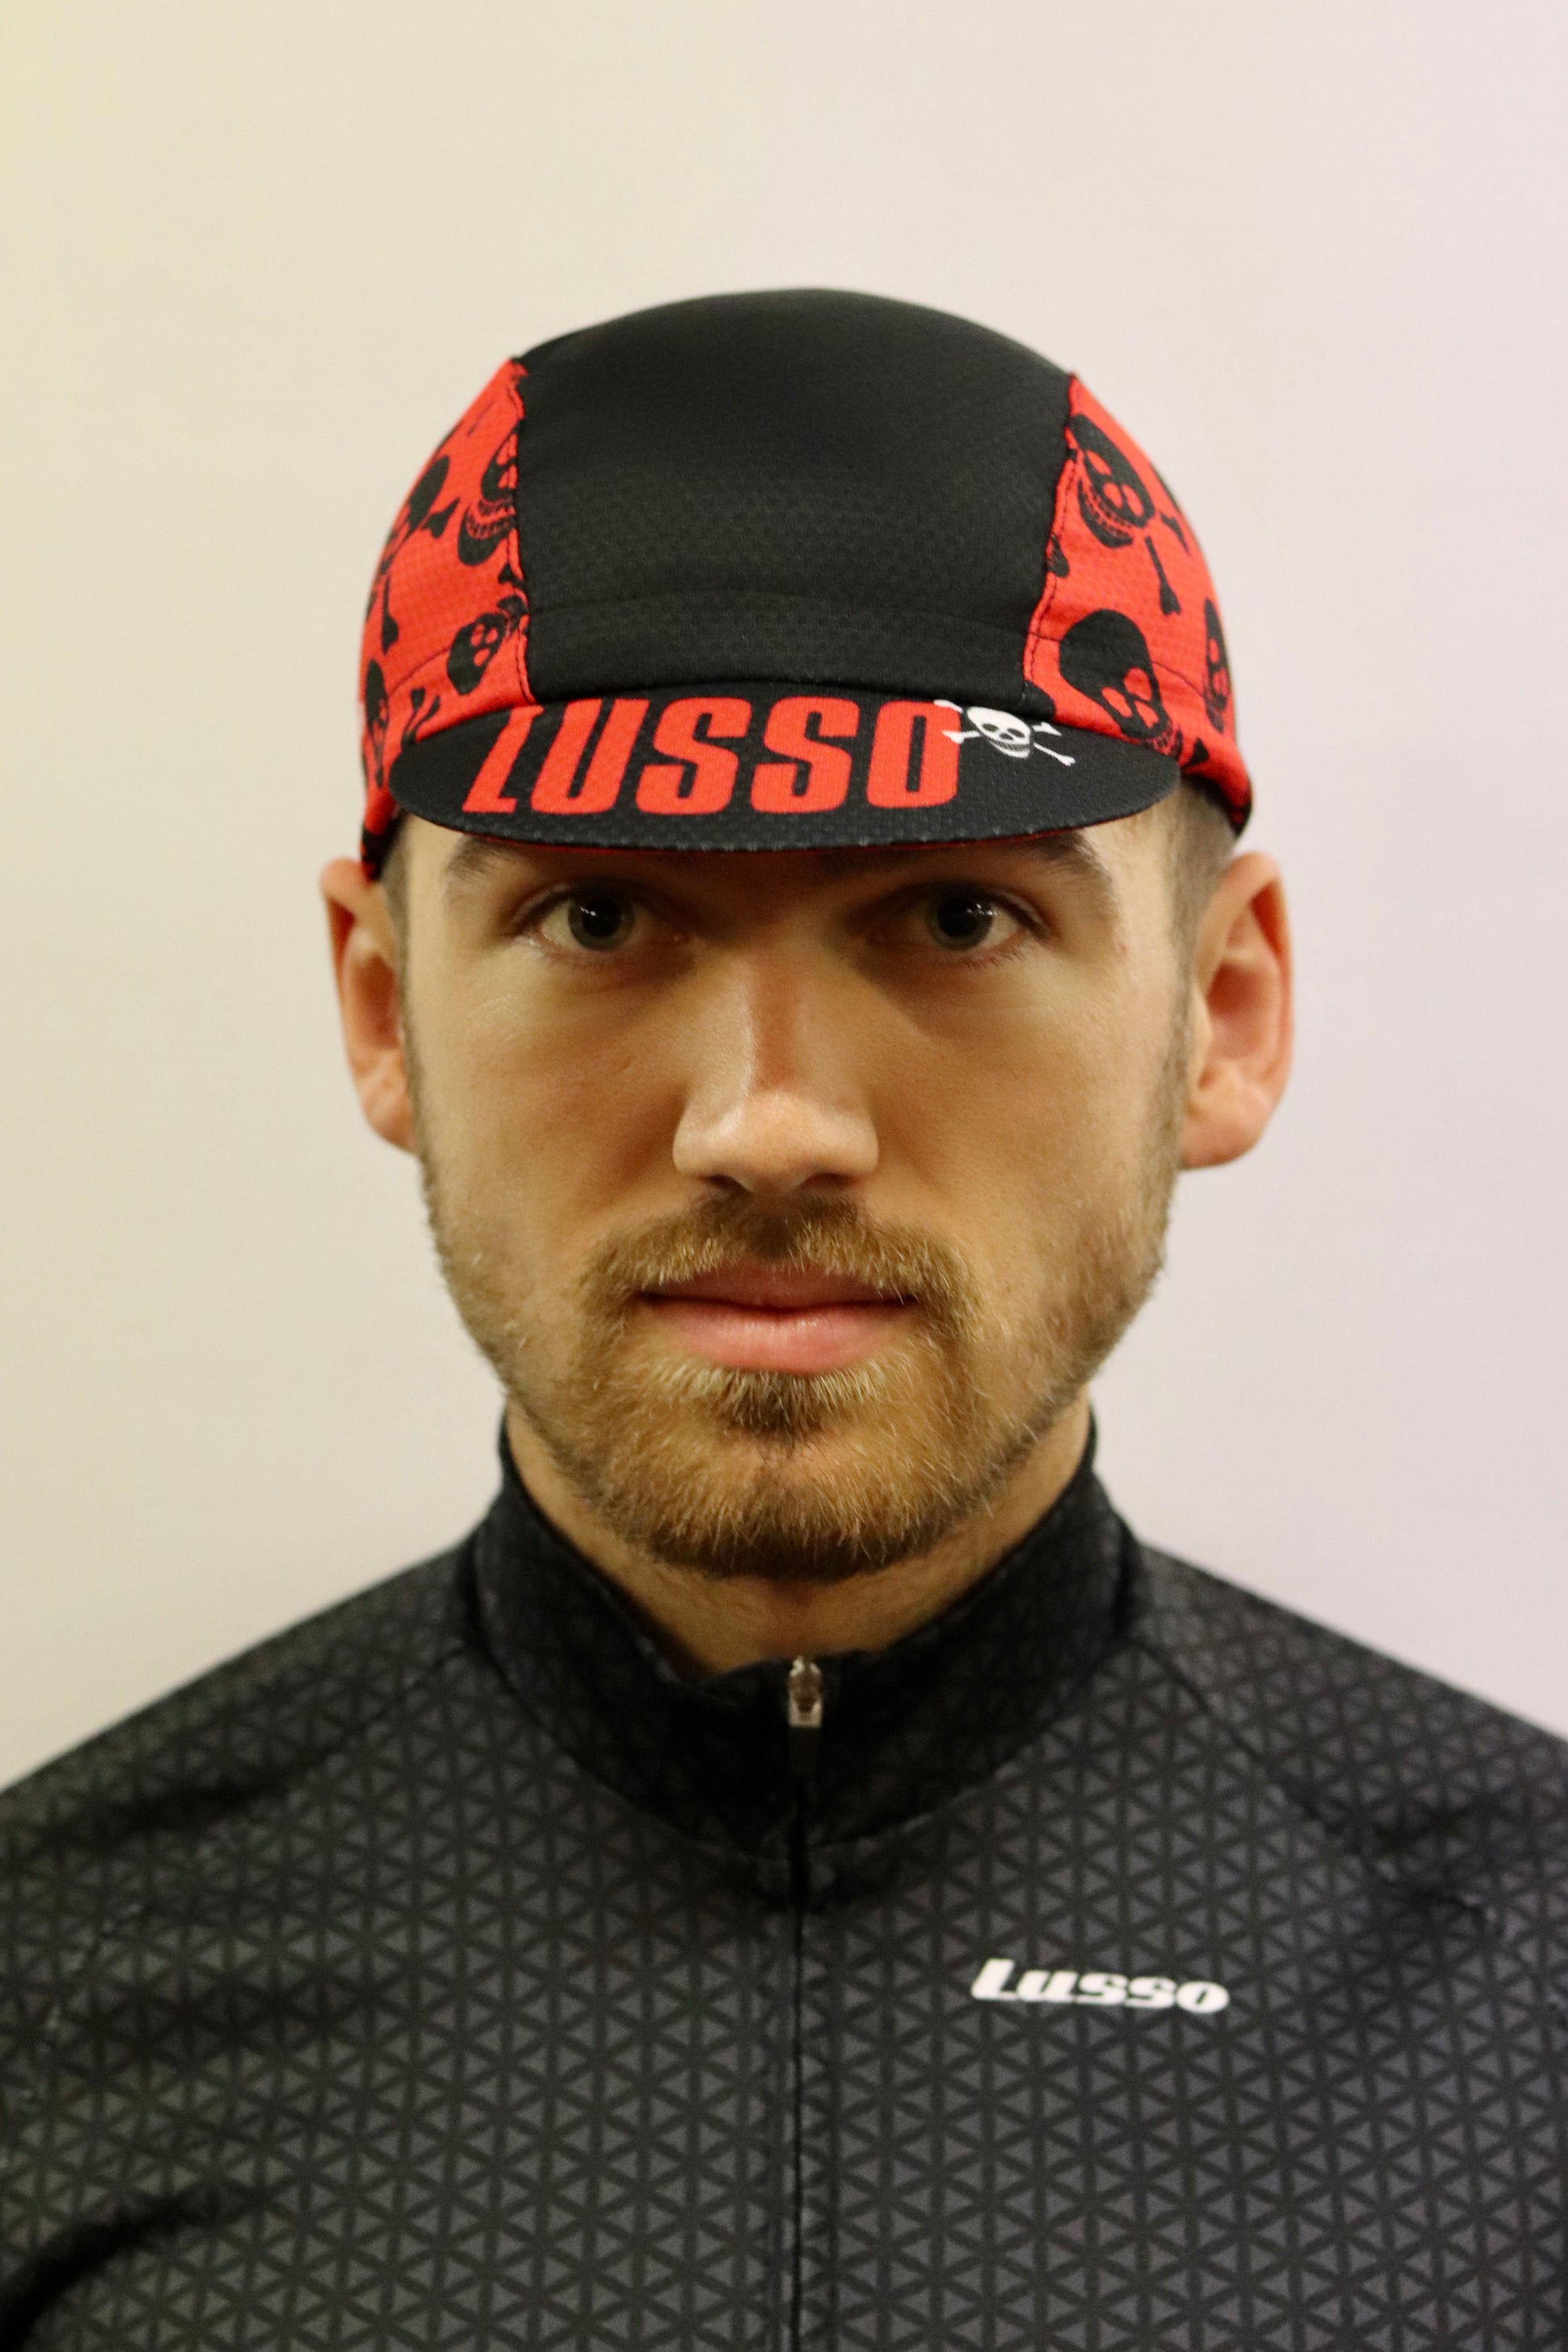 PAIN CAVE Summer cap - Lusso Cycle Wear